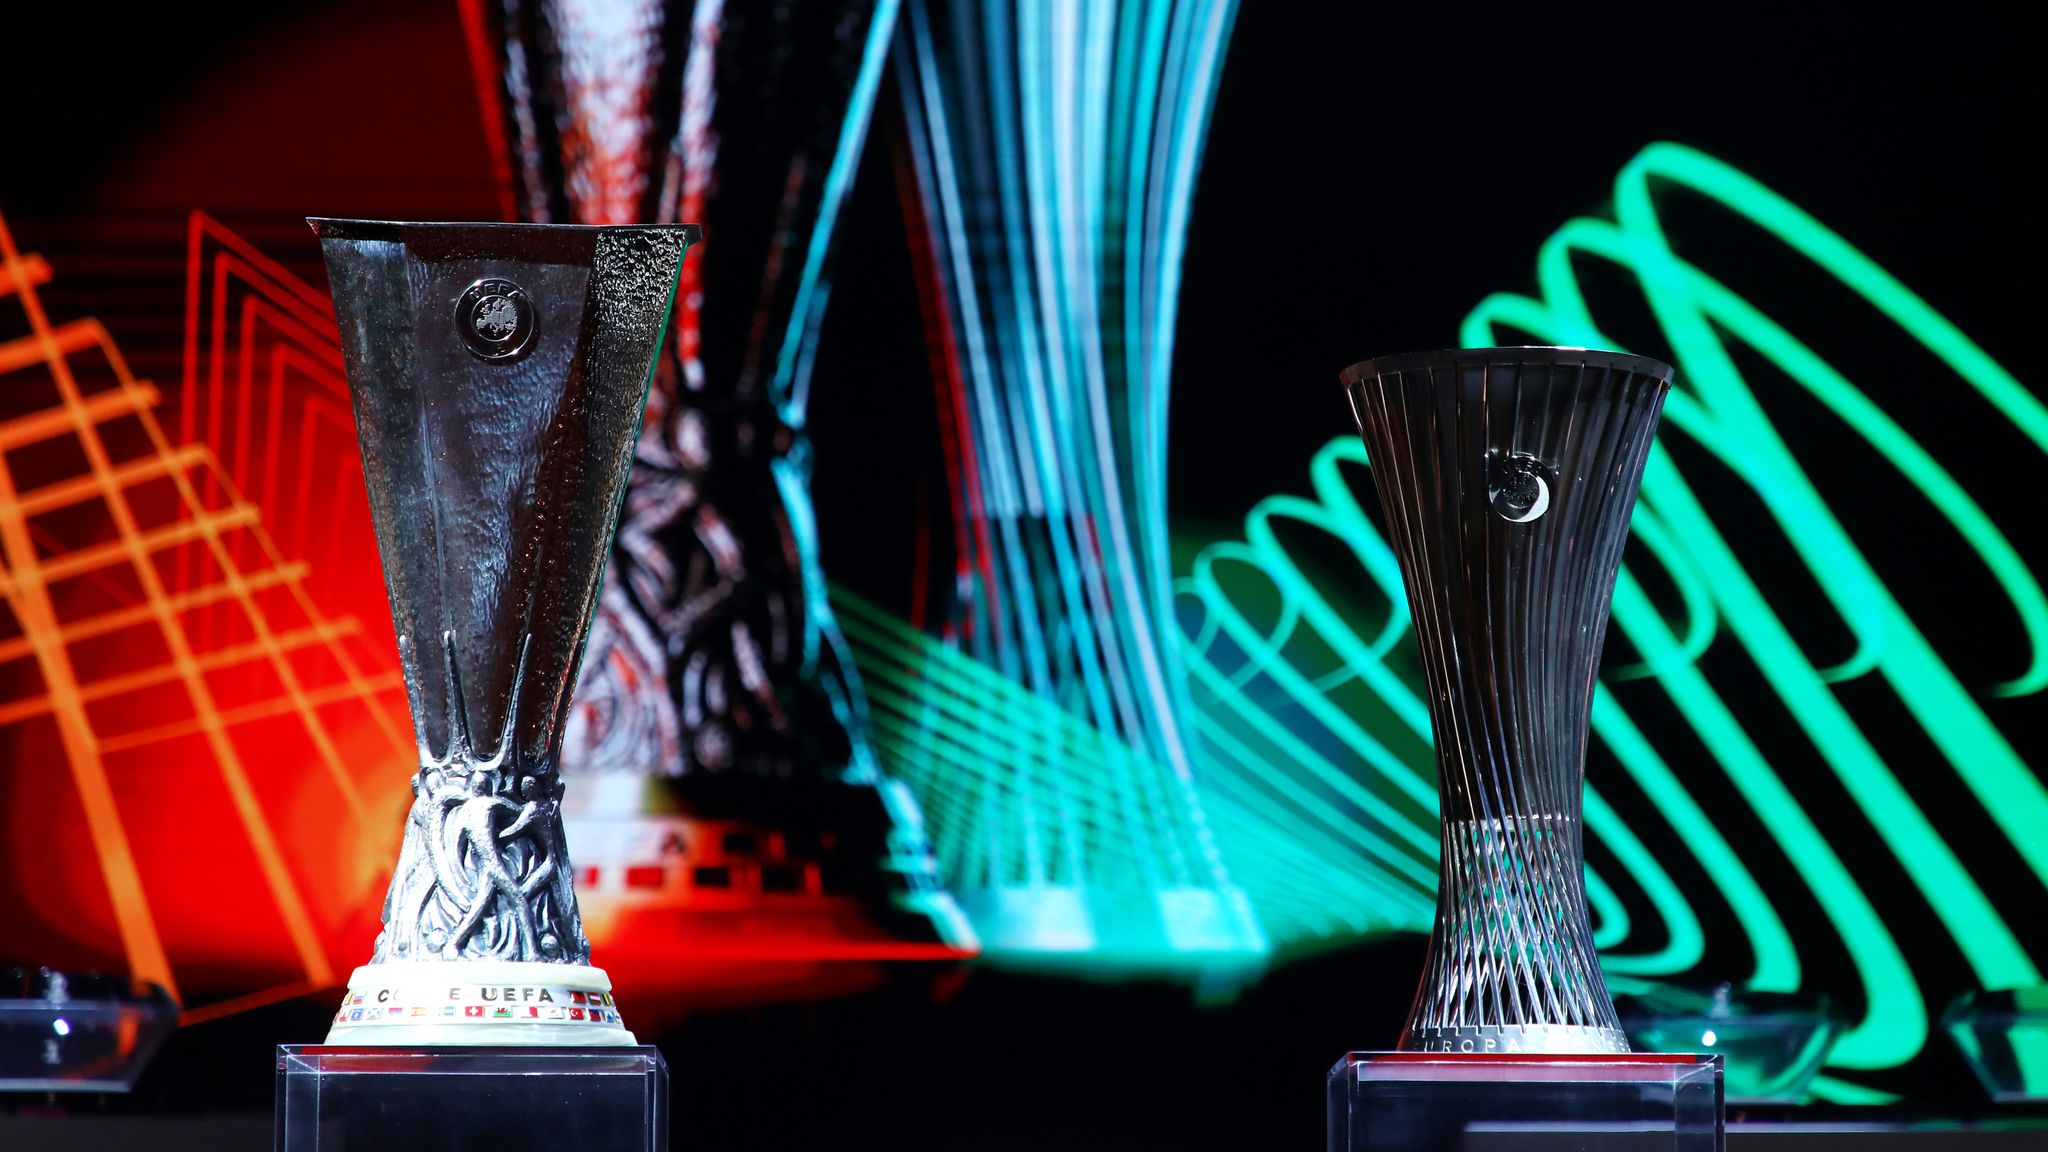 State of play across Europe: Title winners, Champions League, Europa League  and Europa Conference League qualification, Football News